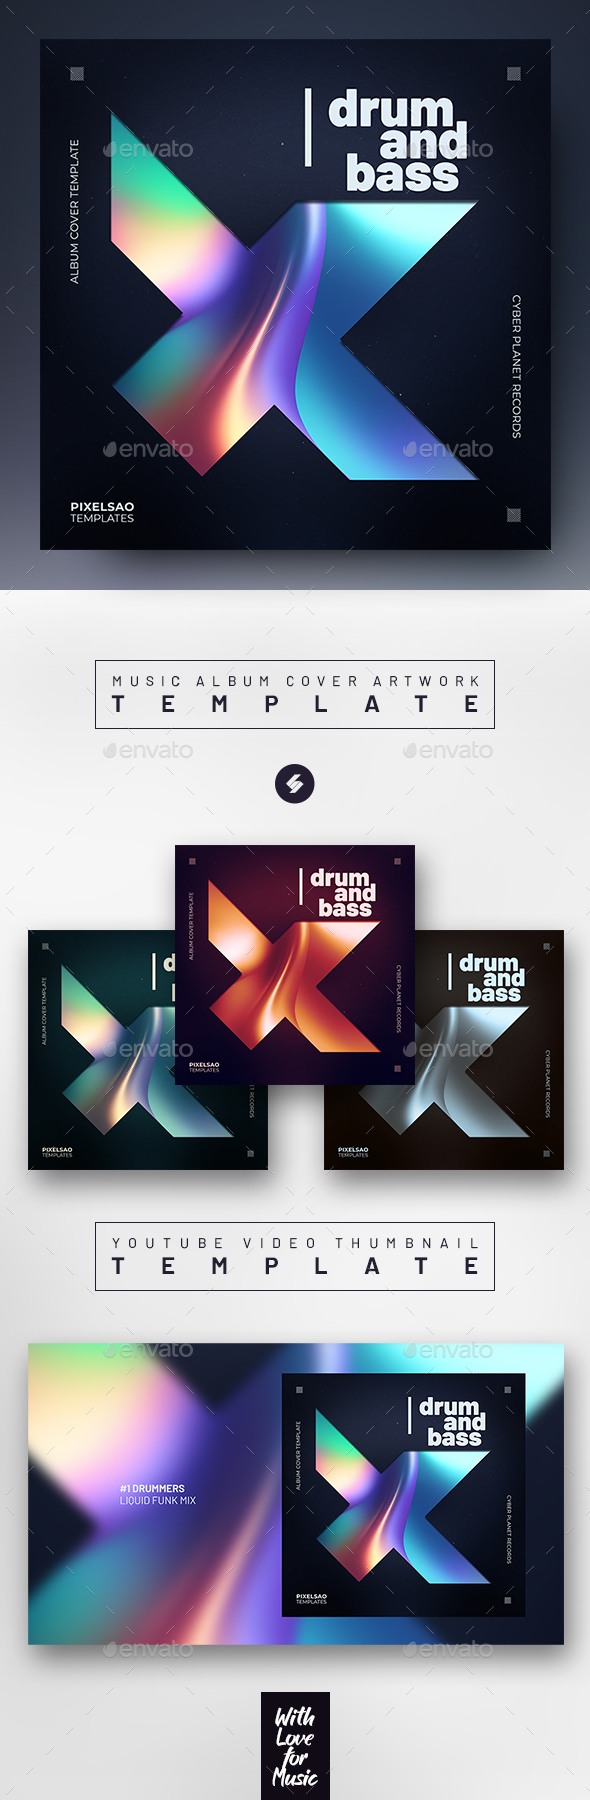 Drum And Bass Album Cover Template